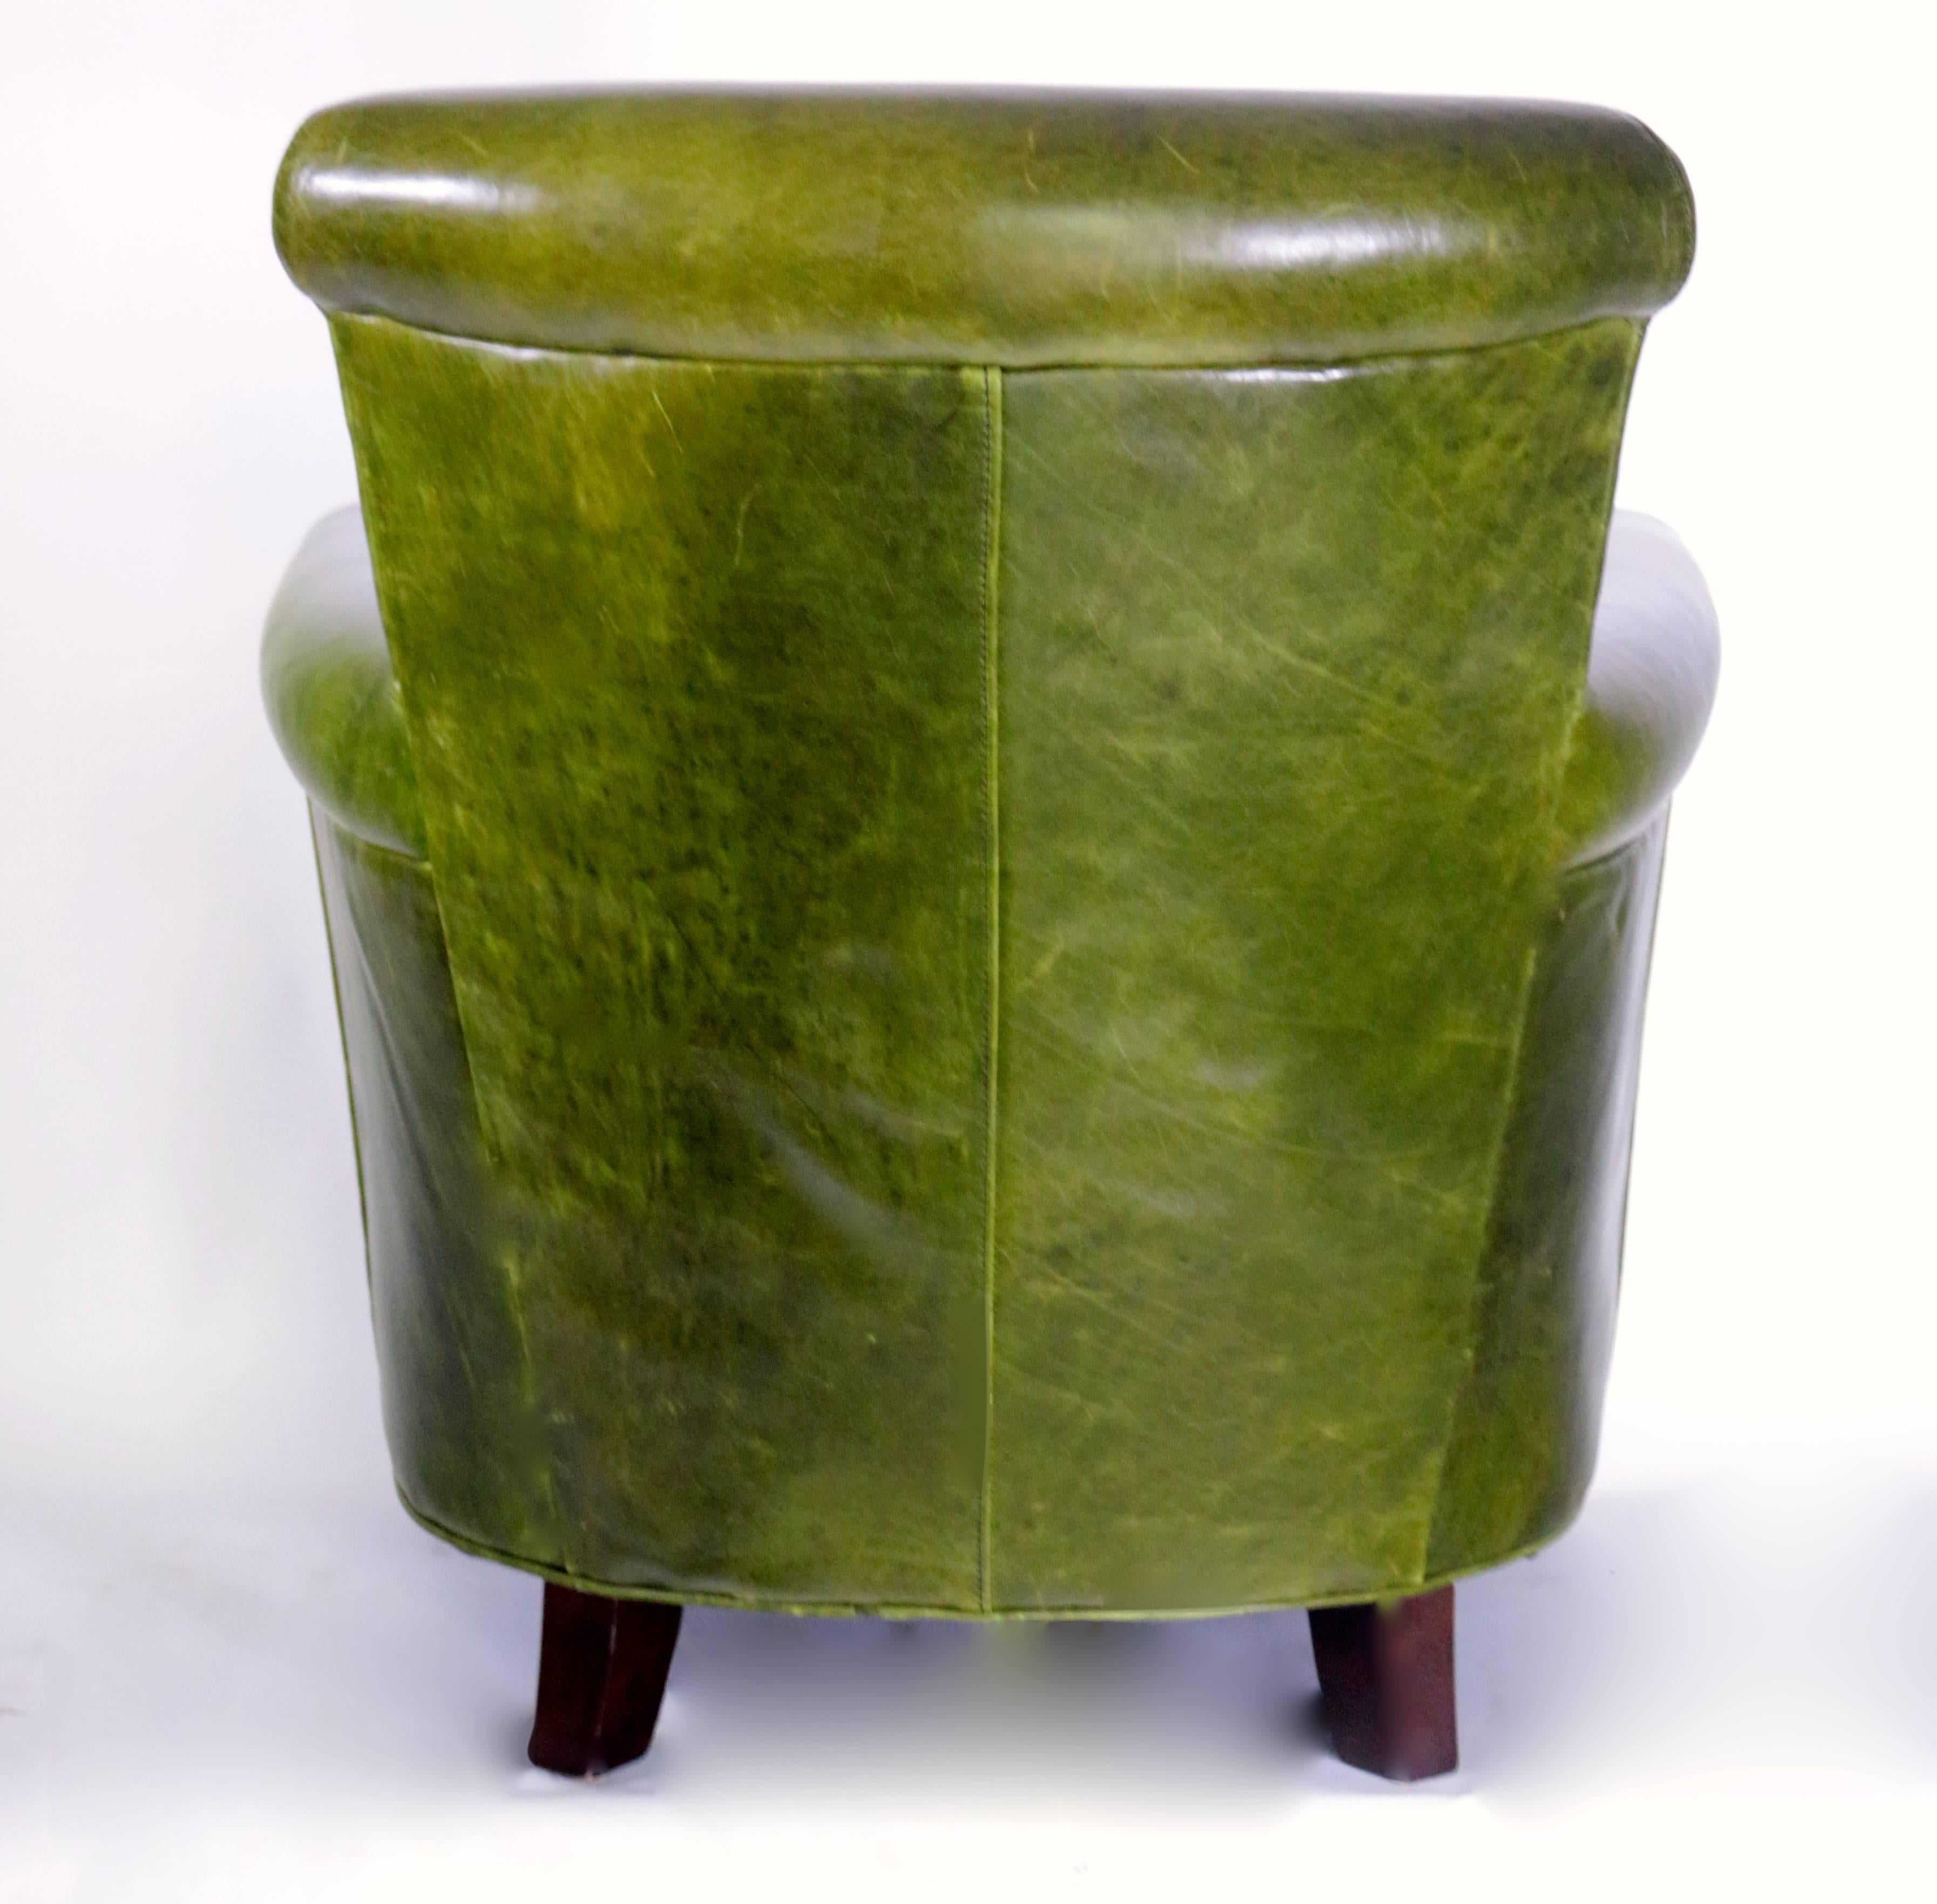 Beautiful distressed French green leather club chair in excellent used condition. This comfortable club chair is comfortable and practical. The distressed green is a dark and powerful tone. The inner width of the seat at its largest point is 23.5